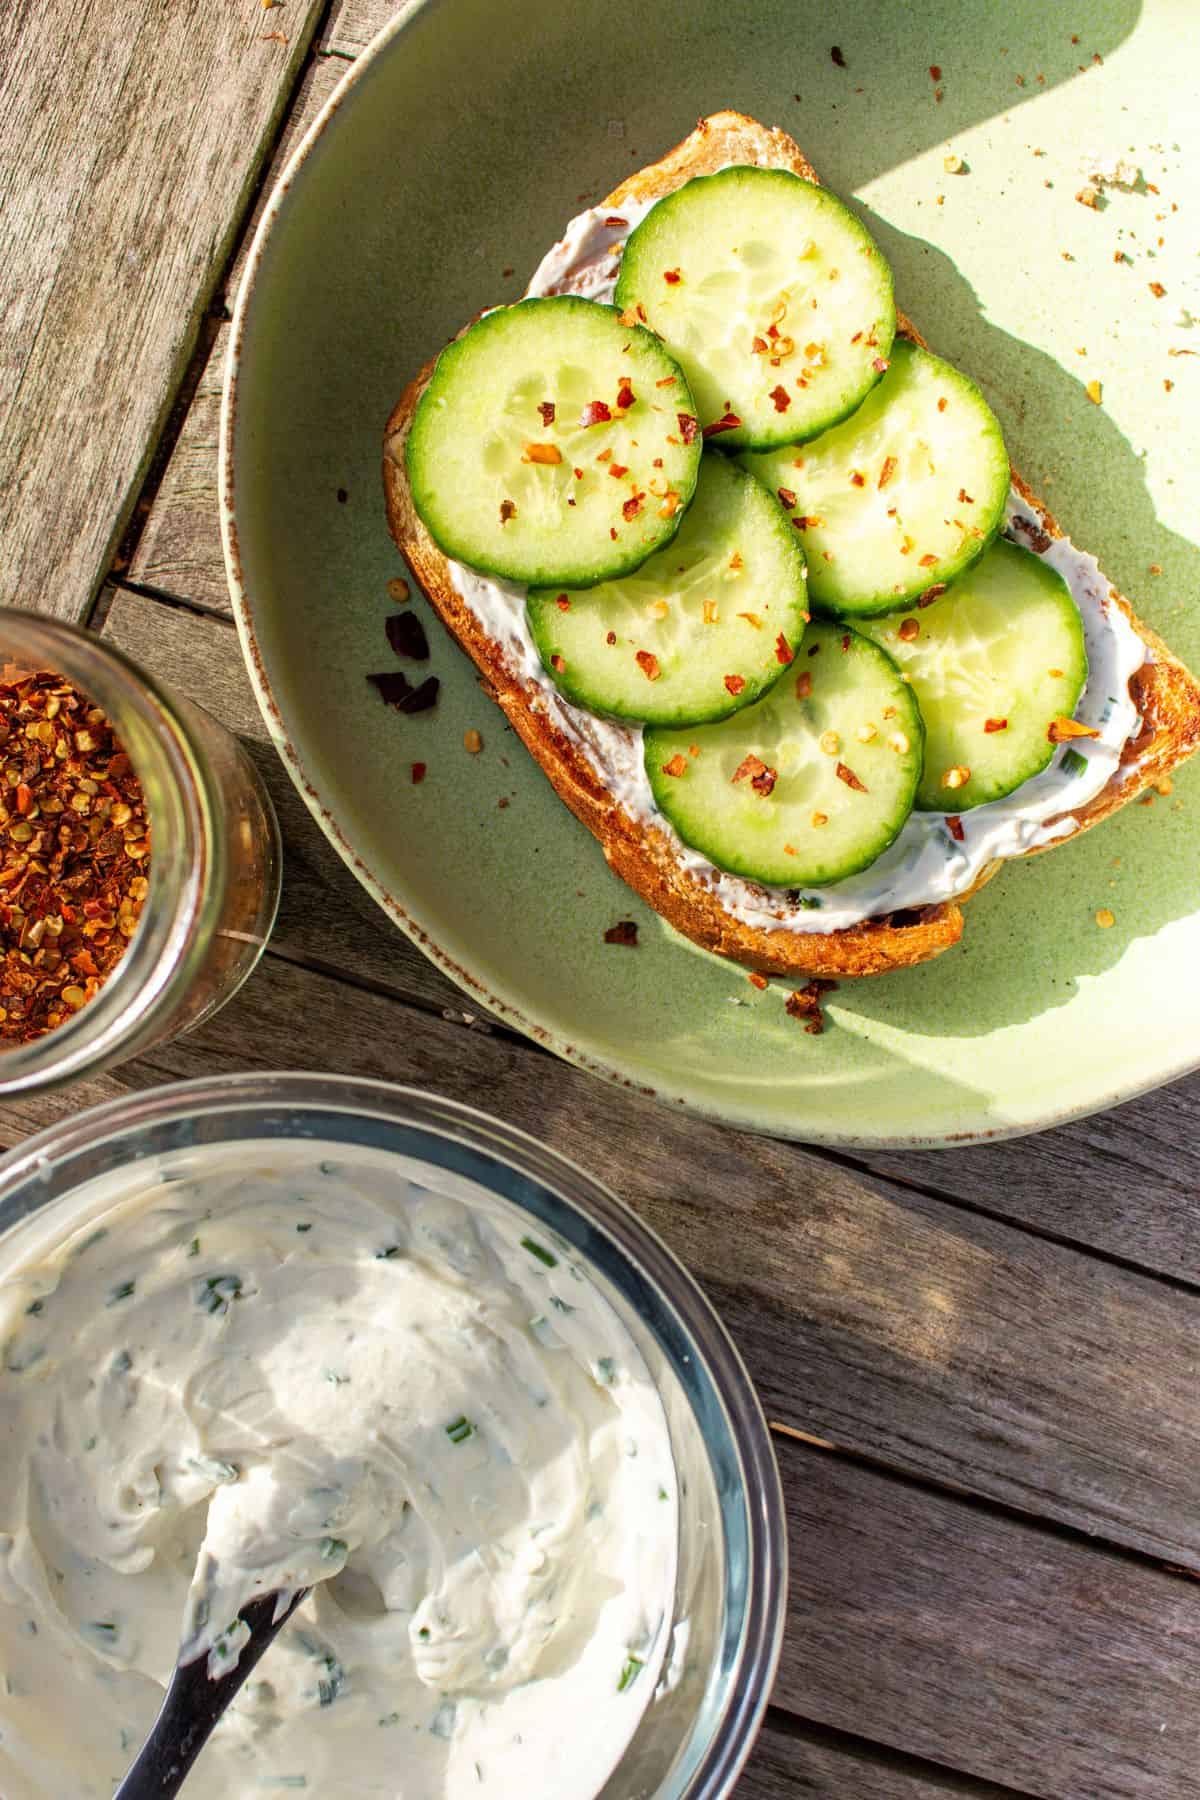  A pale green plate with 1 slice of toast layered with cream cheese and cucumber slices, a bowl of cream cheese and chilli flakes.